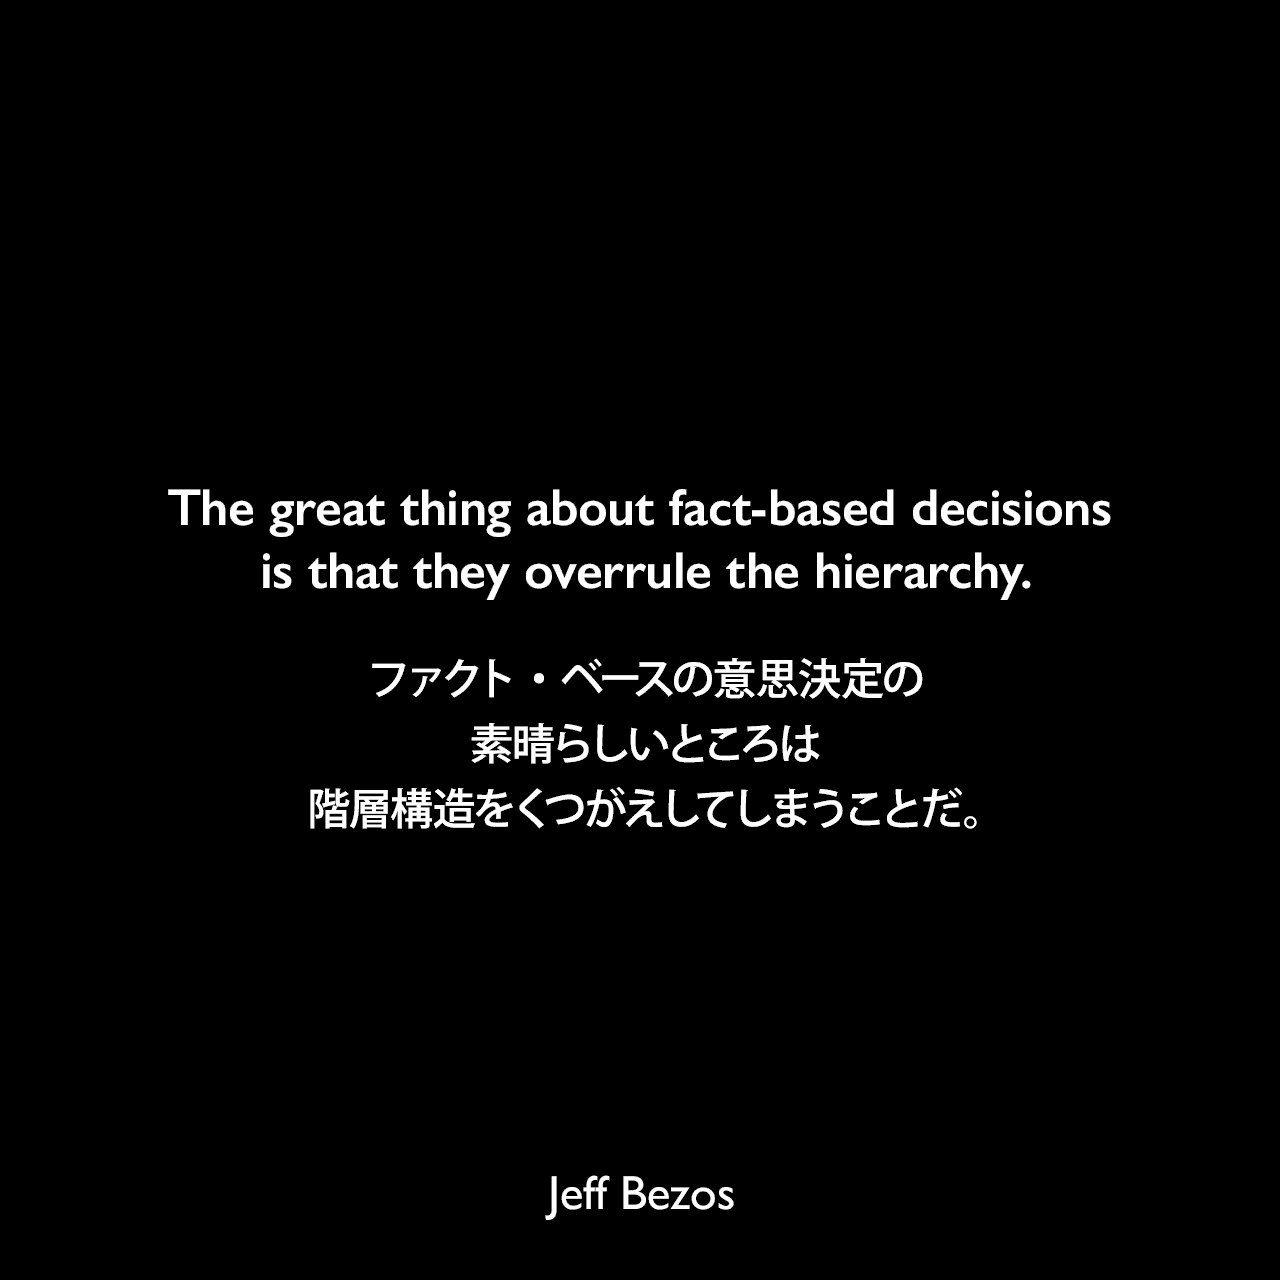 The great thing about fact-based decisions is that they overrule the hierarchy.ファクト・ベースの意思決定の素晴らしいところは階層構造をくつがえしてしまうことだ。Jeff Bezos